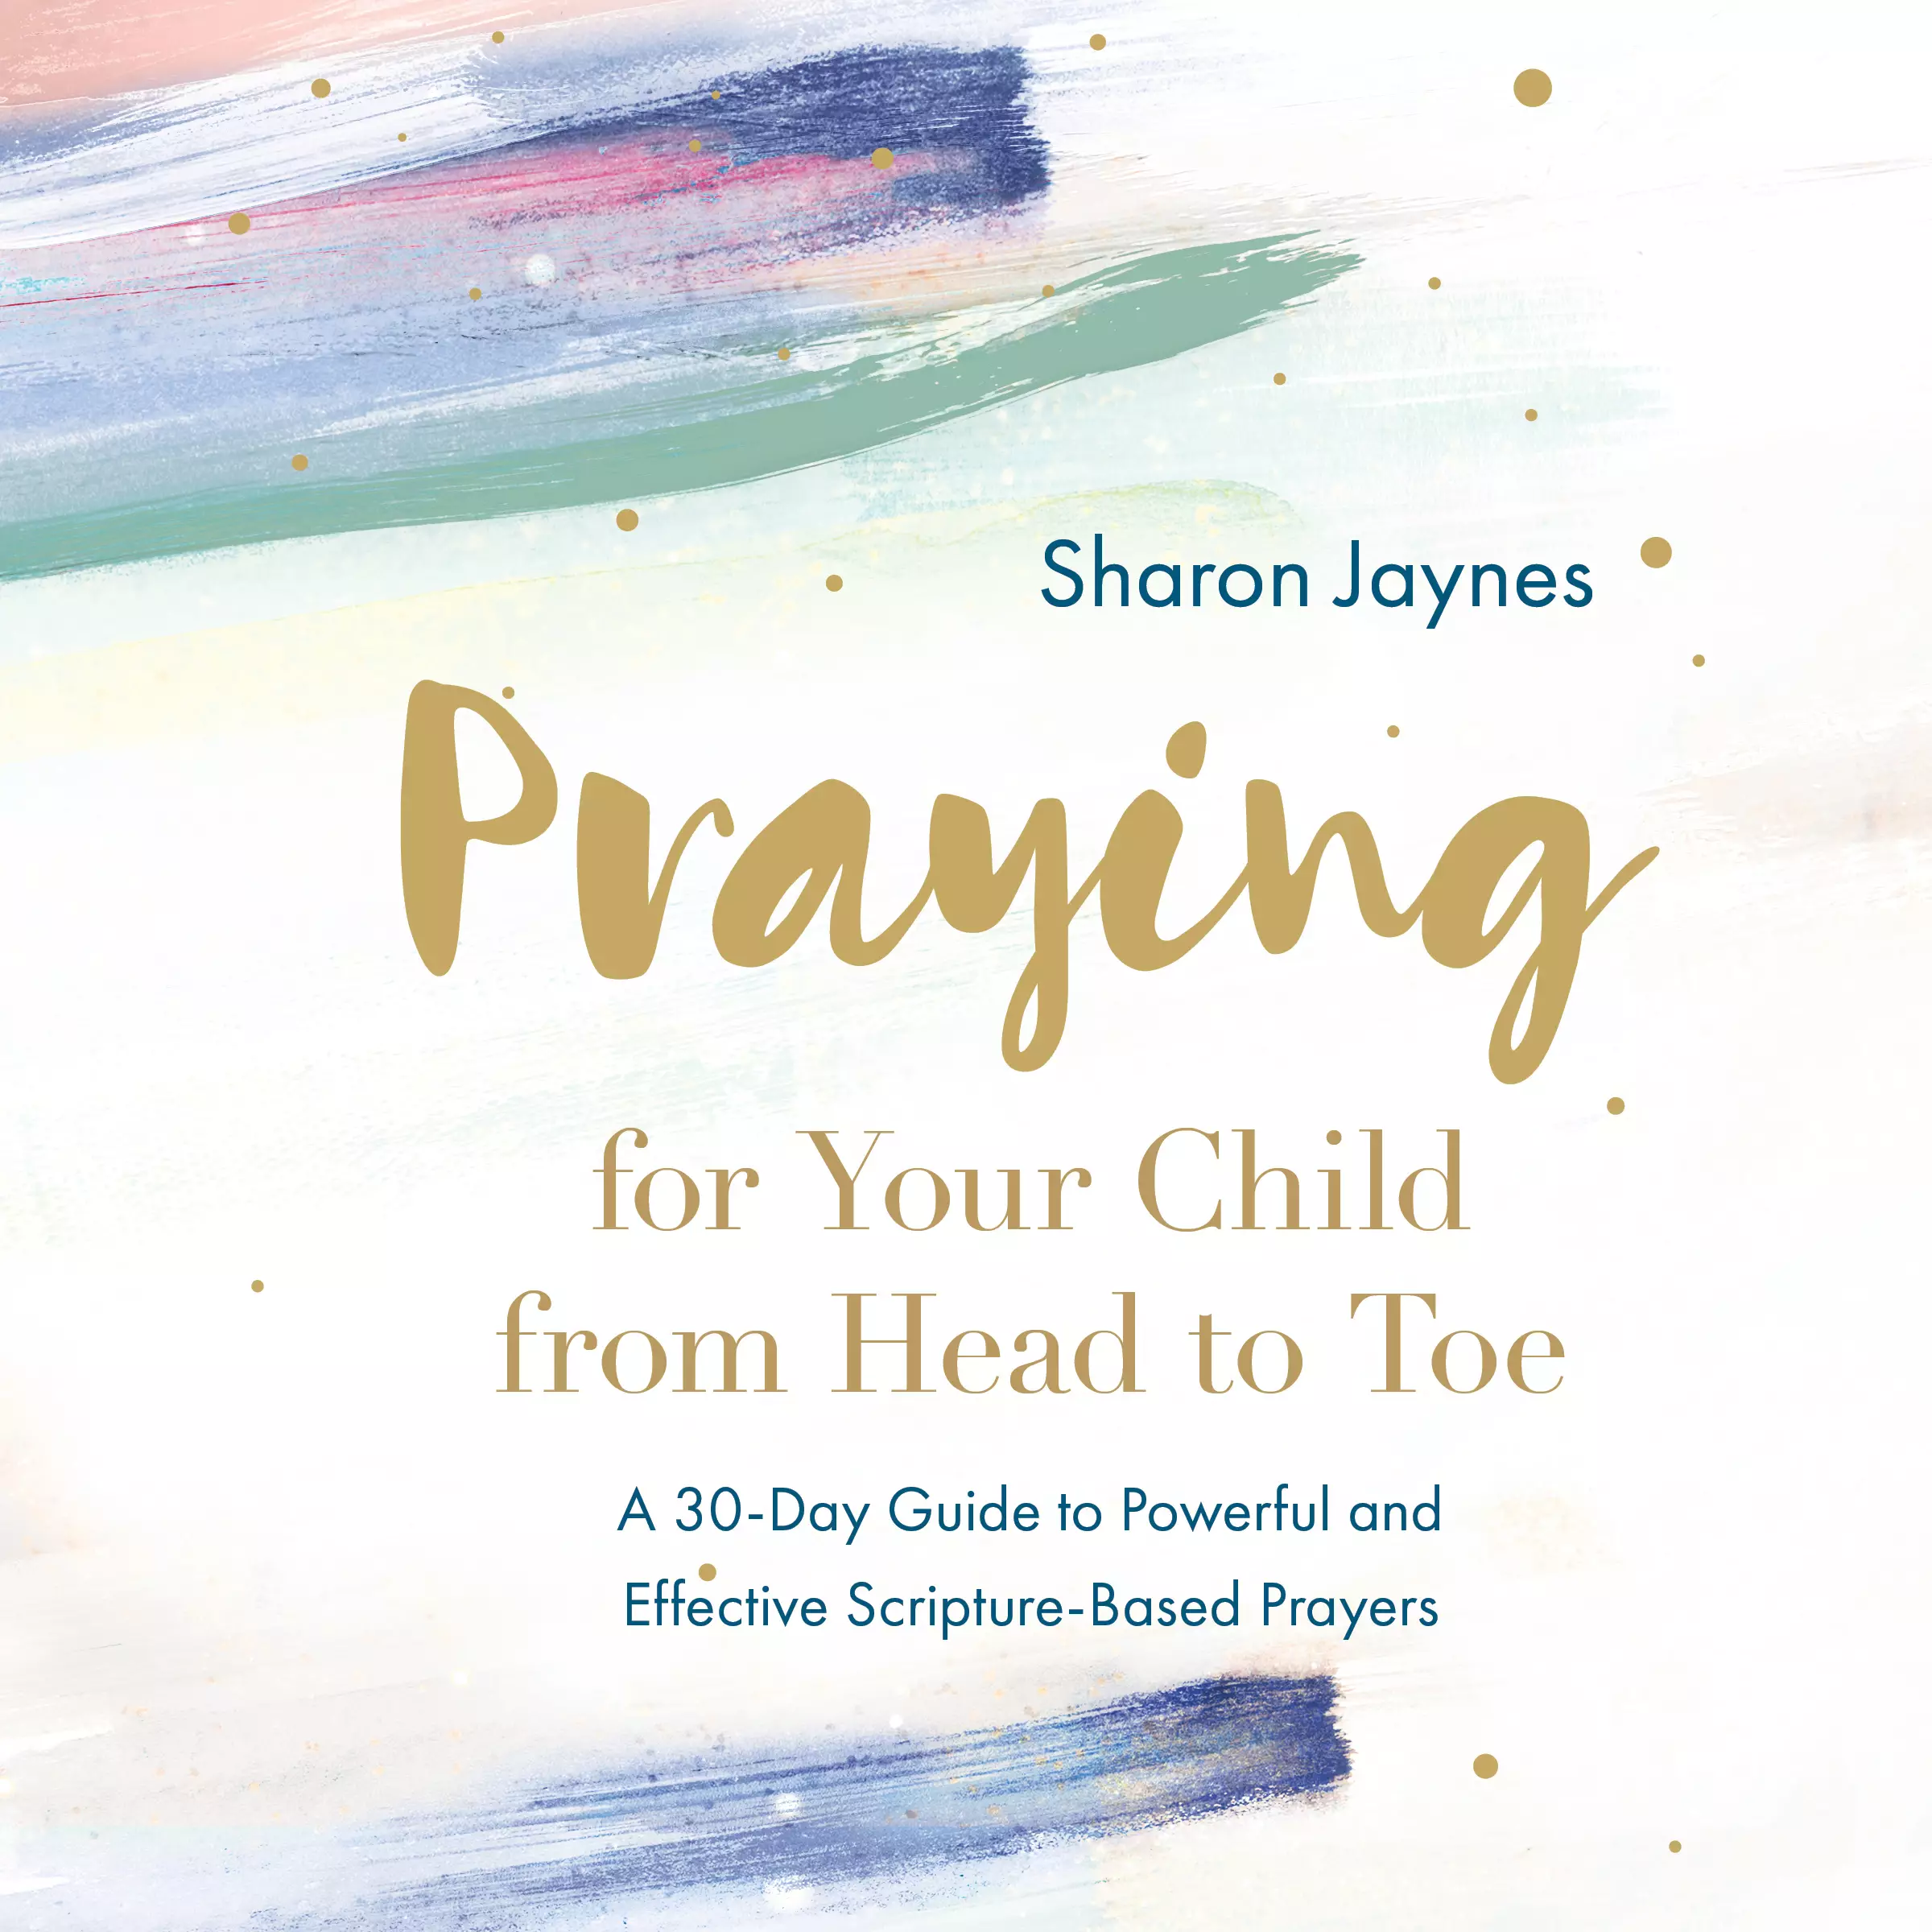 Praying for Your Child from Head to Toe